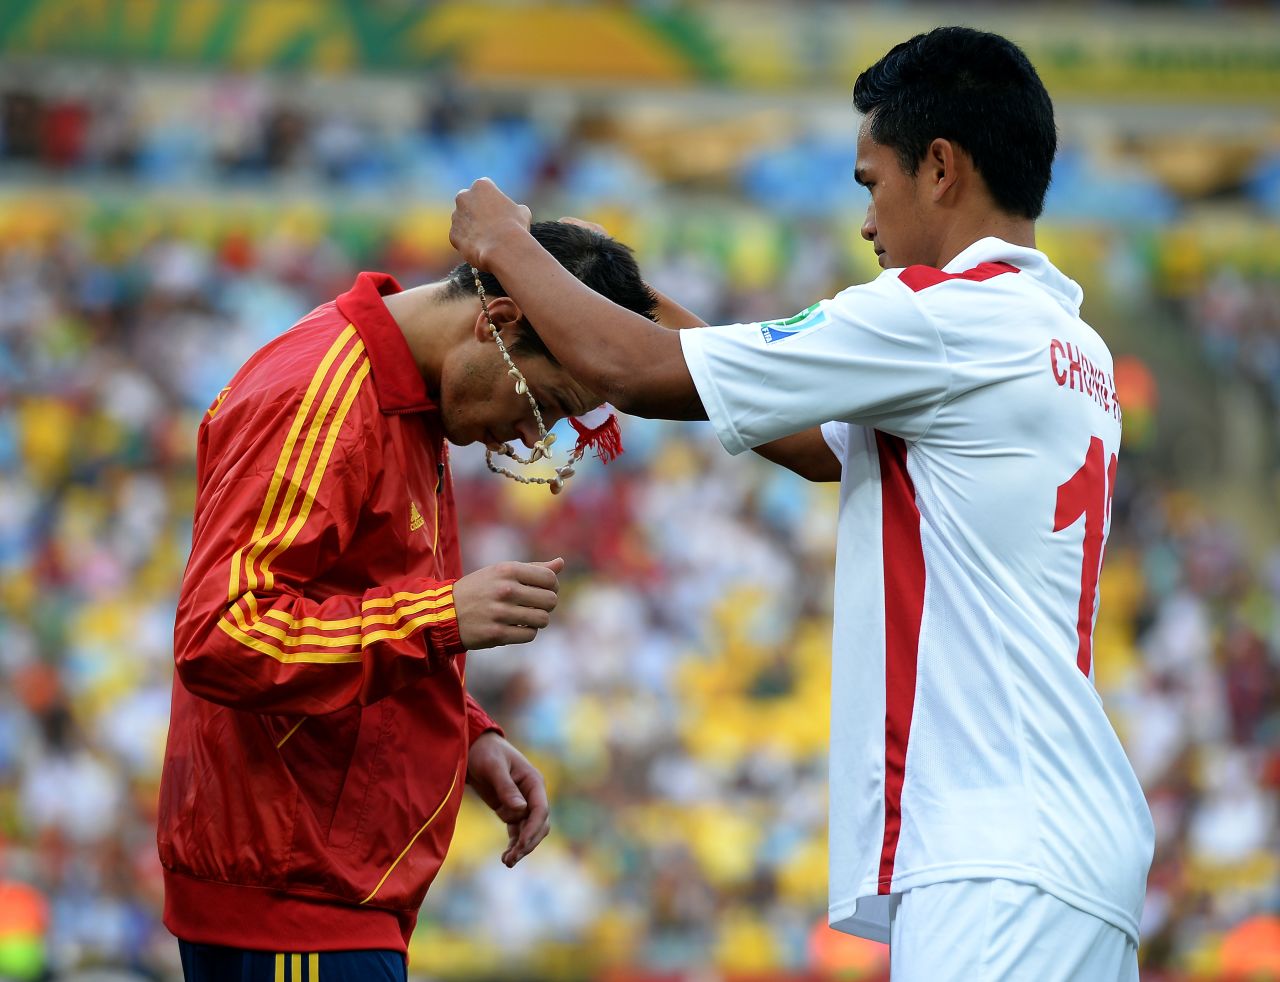 Before the game Tahiti's players presented each man in the Spanish squad with a necklace. Here, Steevy Chong Hue puts one round the neck of Cesar Azpilicueta.